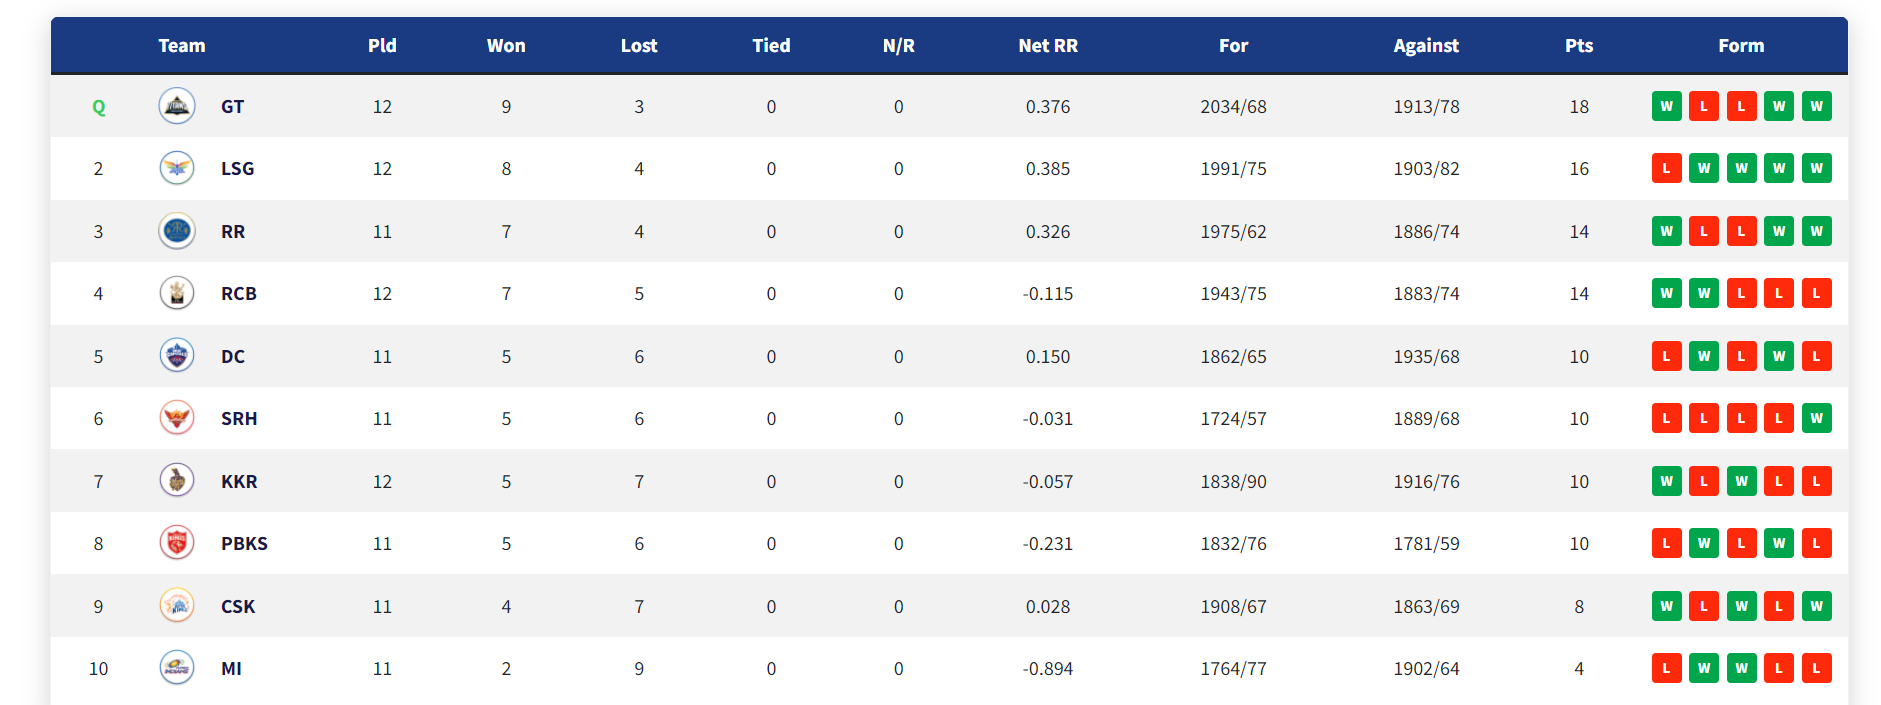 IPL 2022: Updated Points Table Orange Cap and Purple Cap After Match 57 LSG vs GT